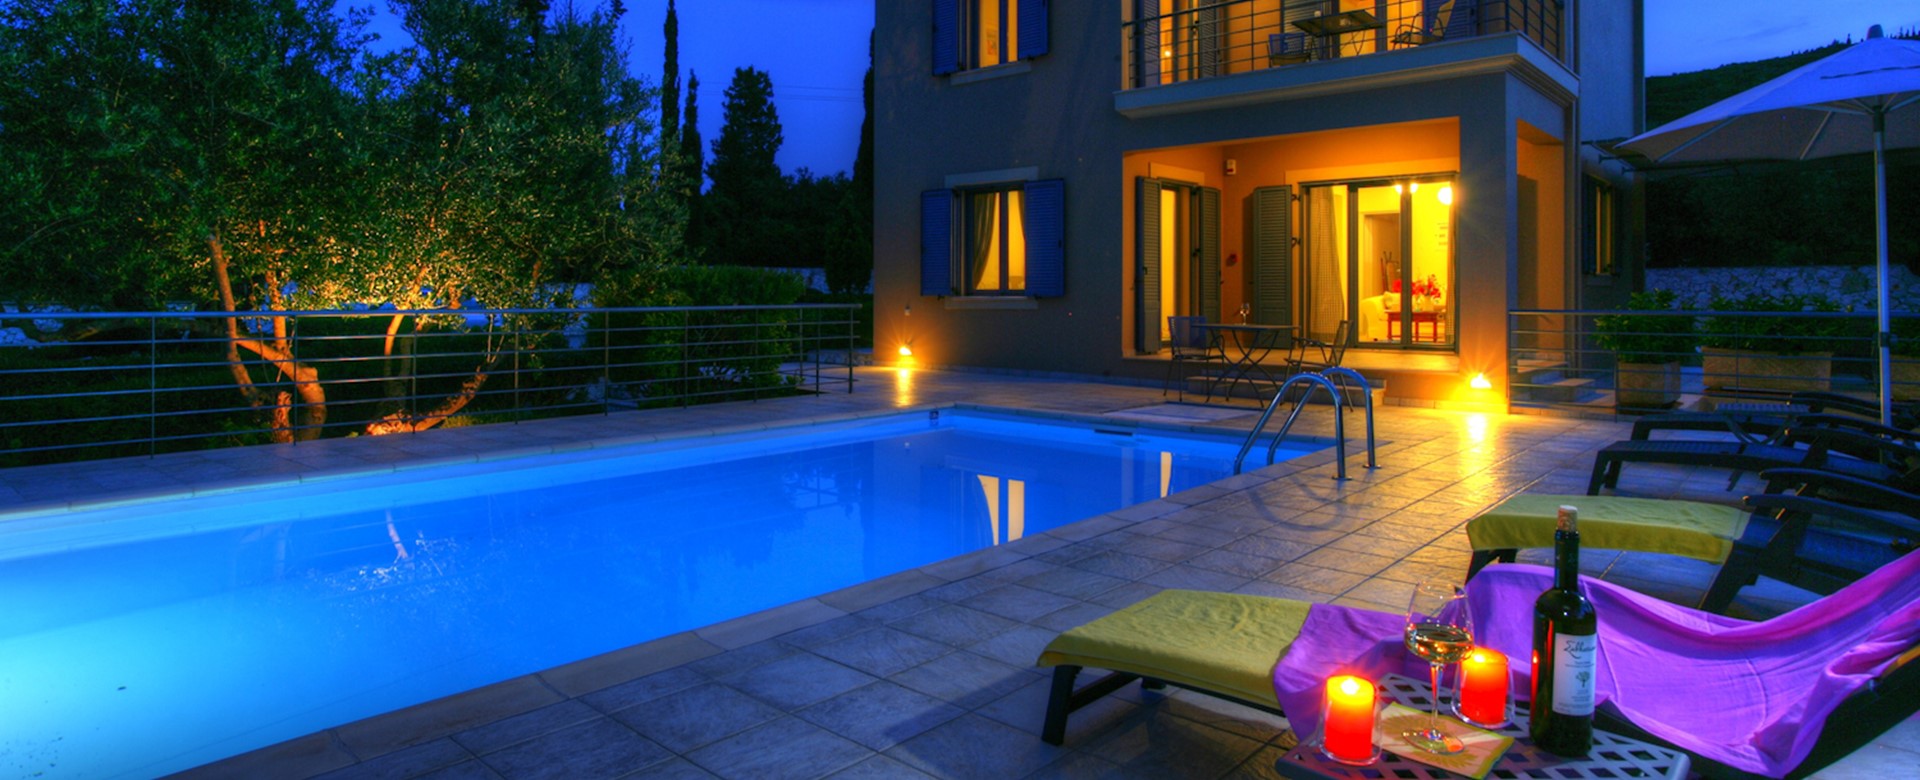 Relax poolside soaking up the calm atmosphere with an evening drink at Villa Roberto, Fiscardo, Kefalonia, Greek Islands